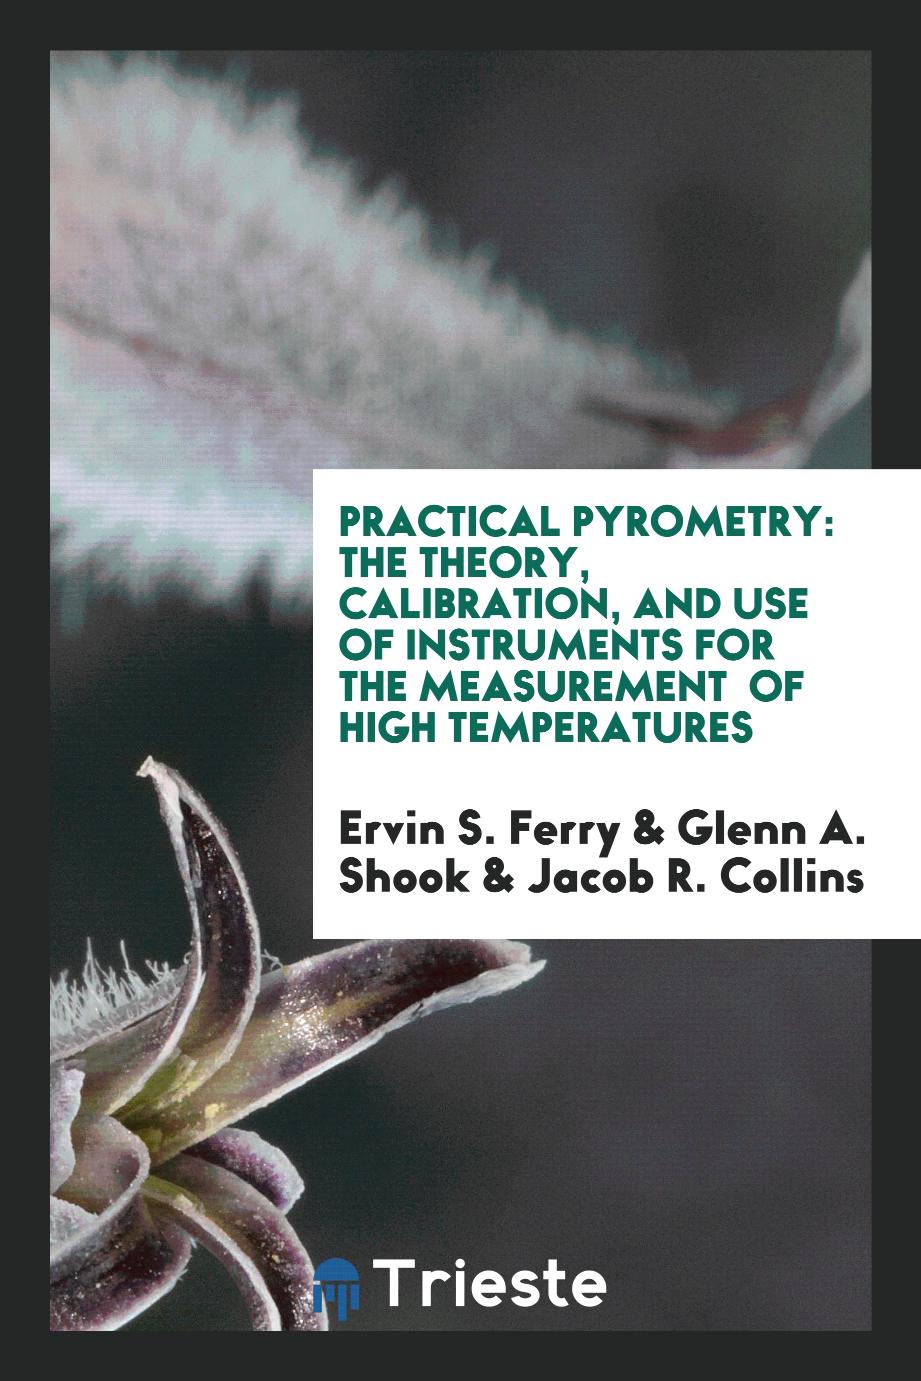 Practical Pyrometry: The Theory, Calibration, and Use of Instruments for the Measurement of High Temperatures